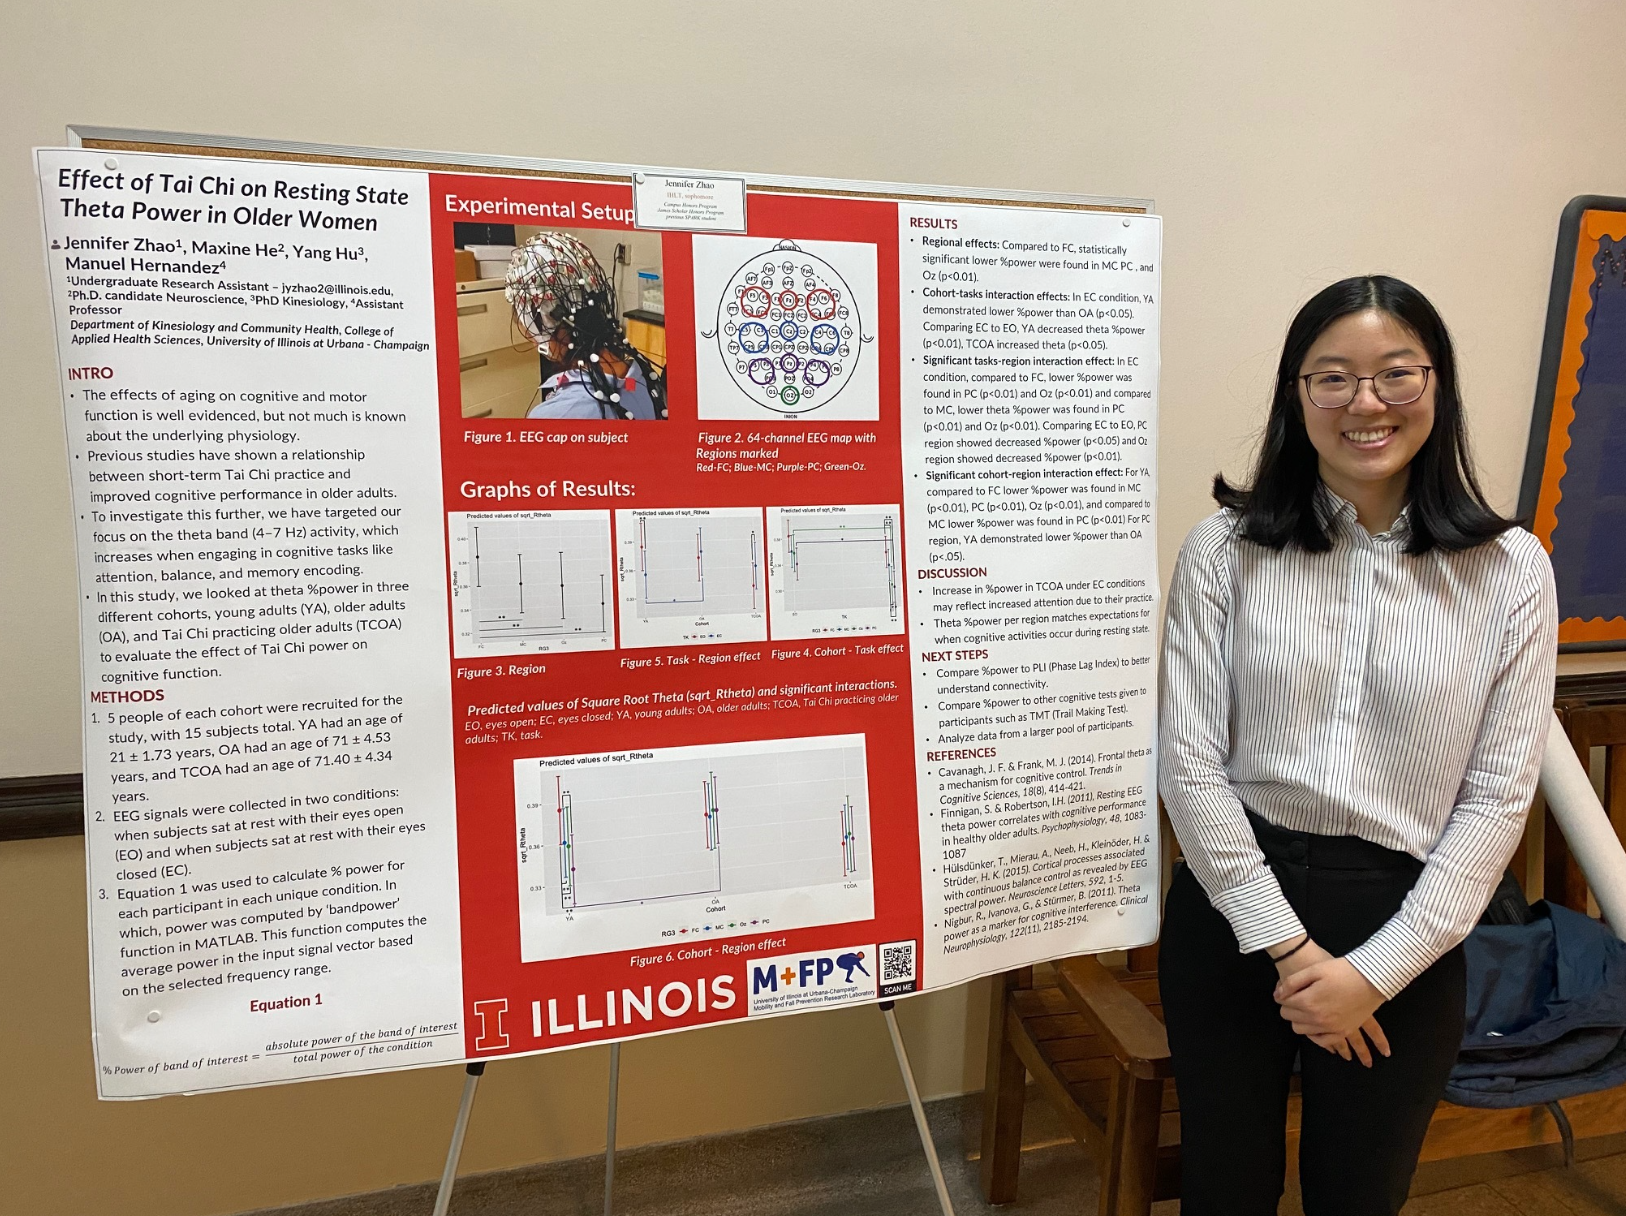 Jen Zhao presenting her findings on the Effect of Tai Chi on Resting State Theta Power in Older Women